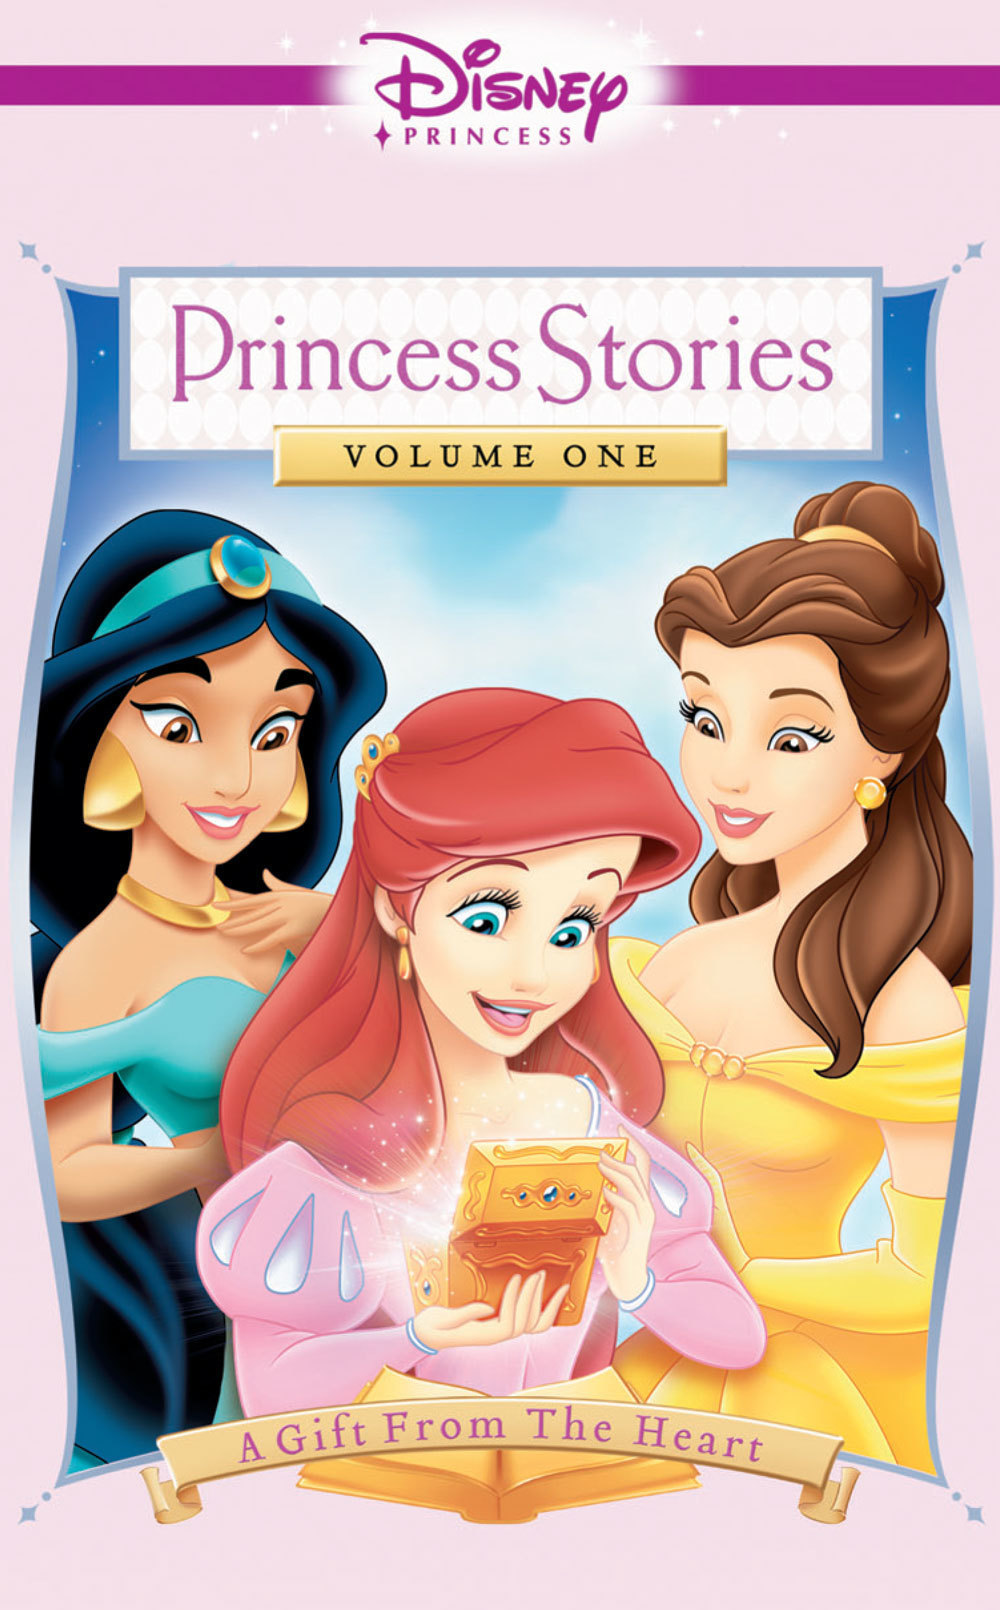 Disney Princess Stories Volume One: A Gift from the Heart | Disney Movies